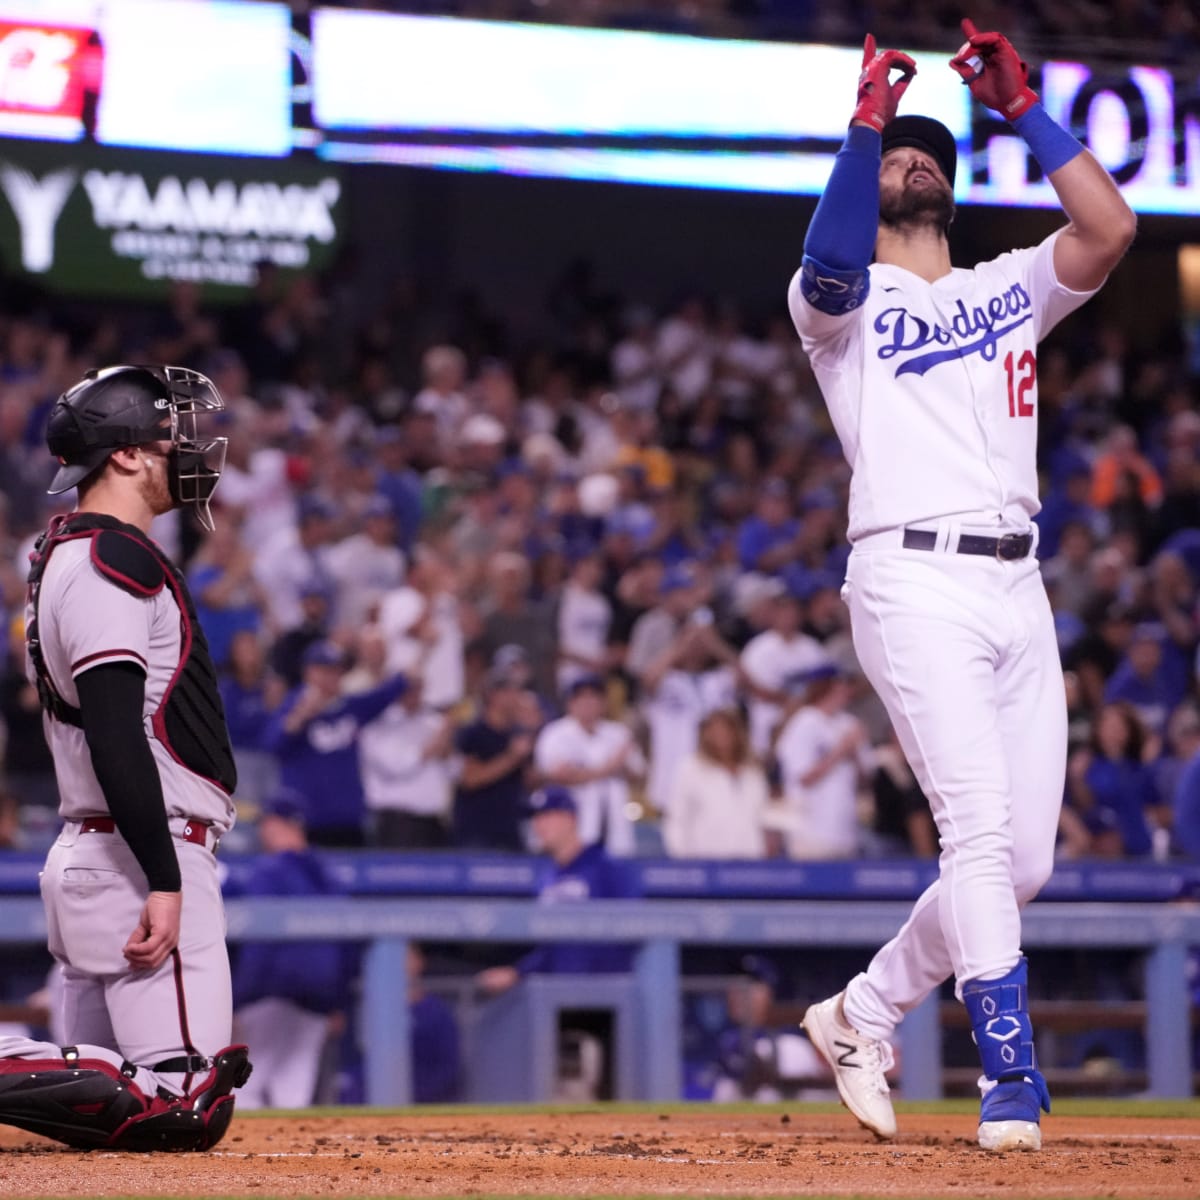 Dodgers OF Joey Gallo's dumbfounded reaction to Mets fans booing